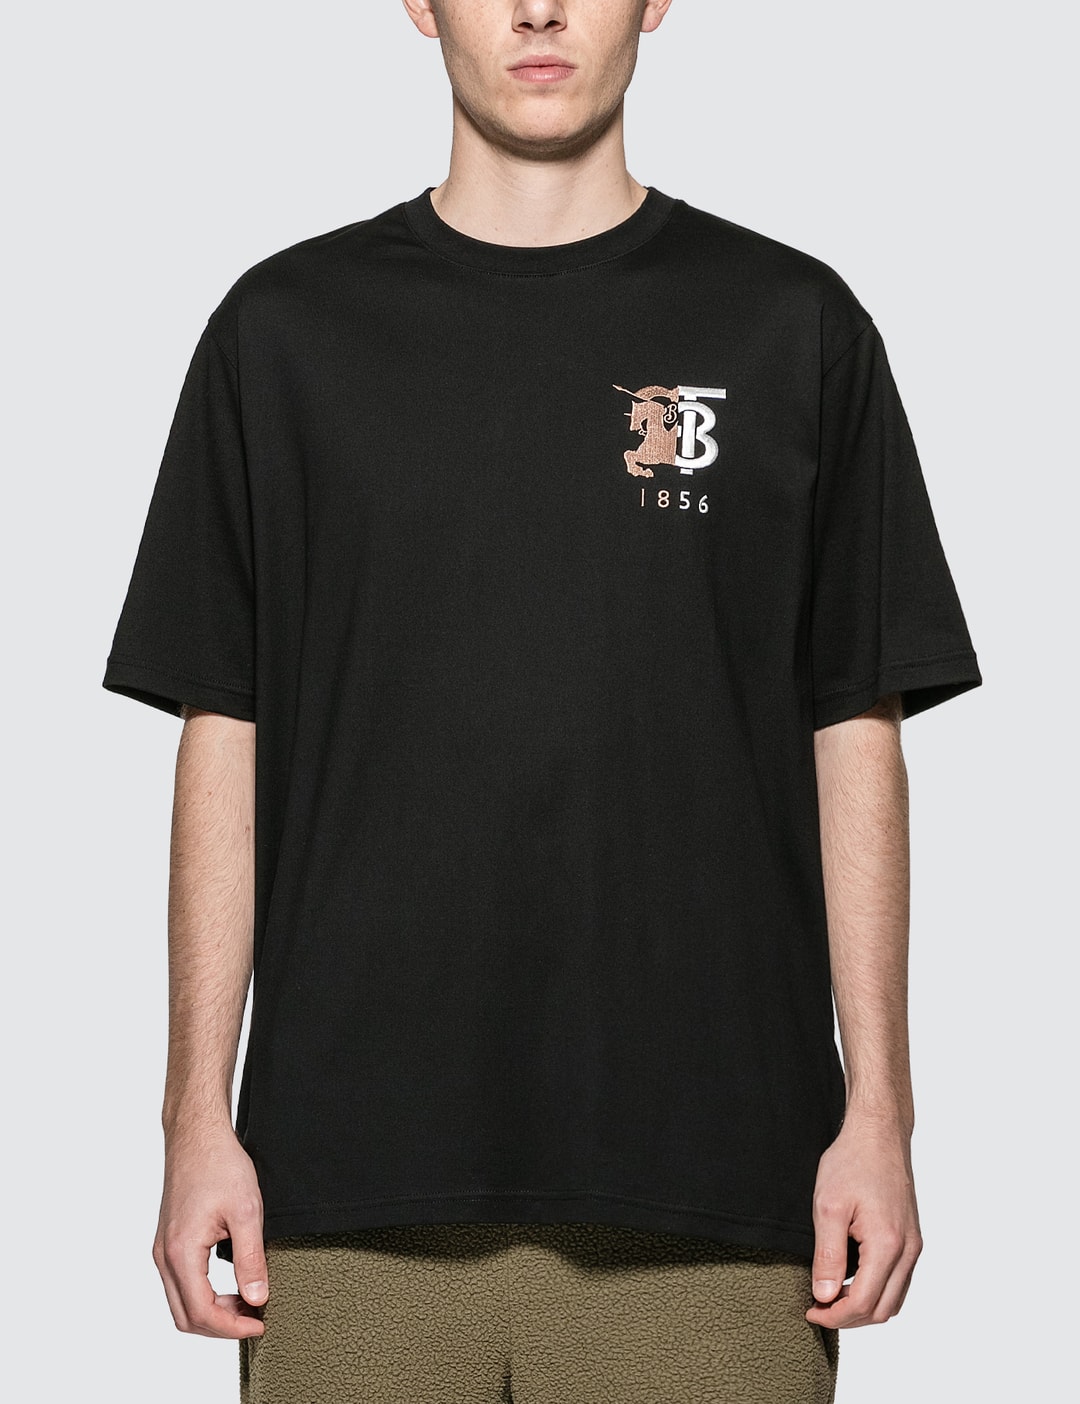 Burberry - 1856 Logo T-Shirt | HBX - Globally Curated Fashion and ...